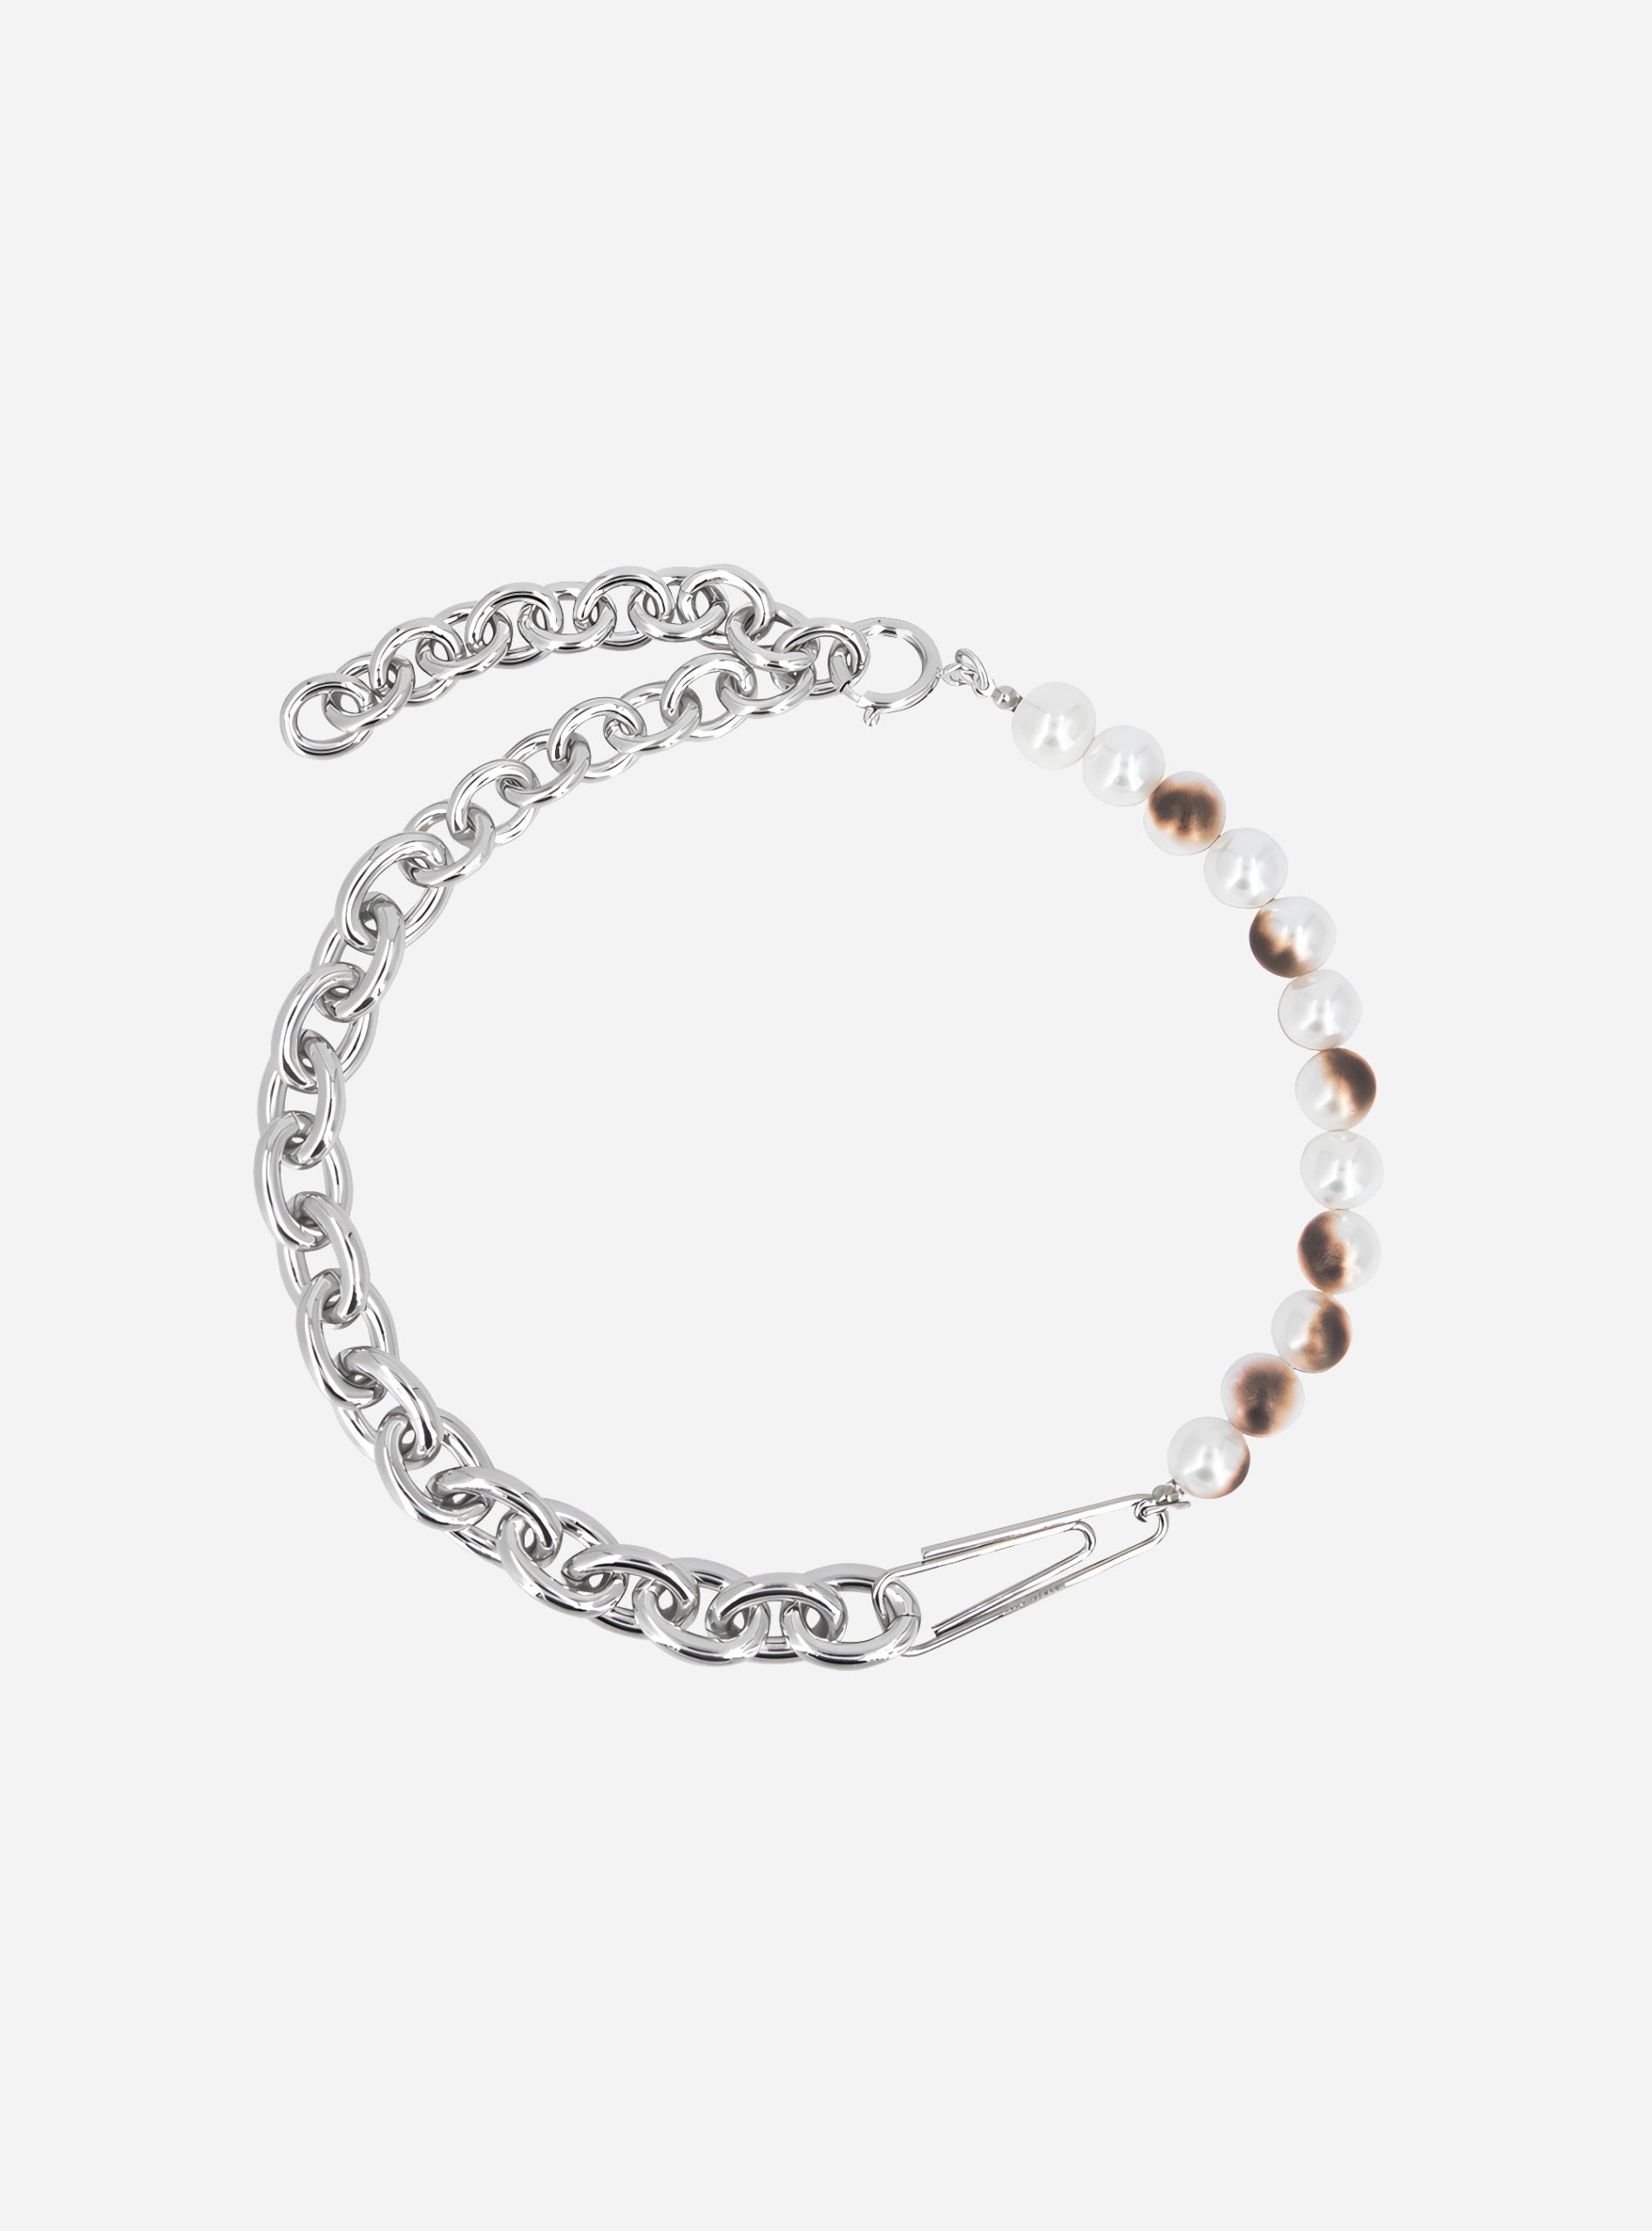 a MIDNIGHTFACTORY silver chain bracelet with white and brown beads featuring Burnt pearls and a paper-clip necklace.